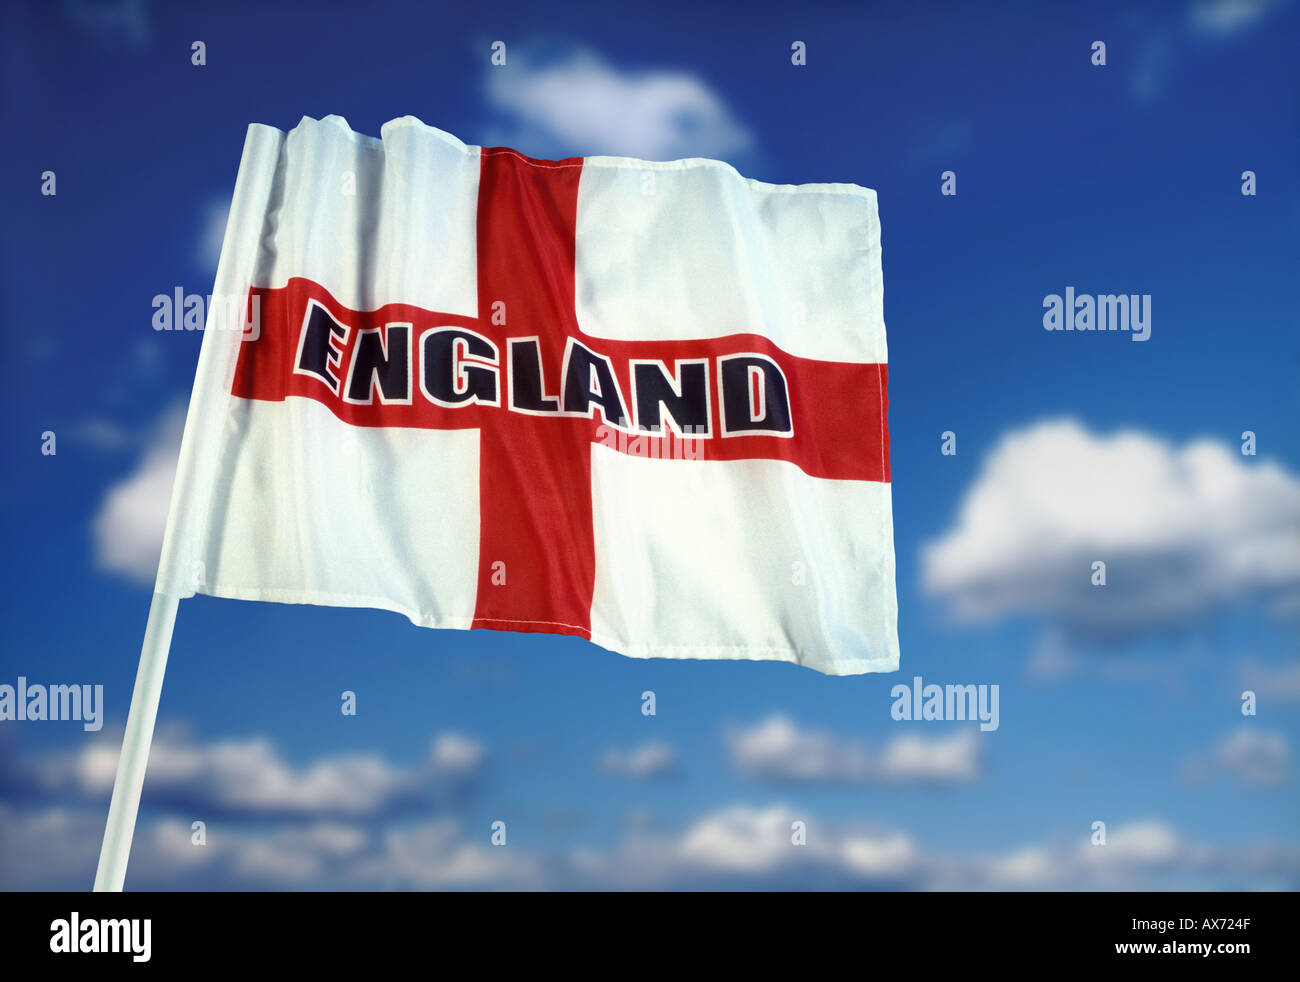 English flag of Saint George with England logo and blue sky white cloud background Stock Photo